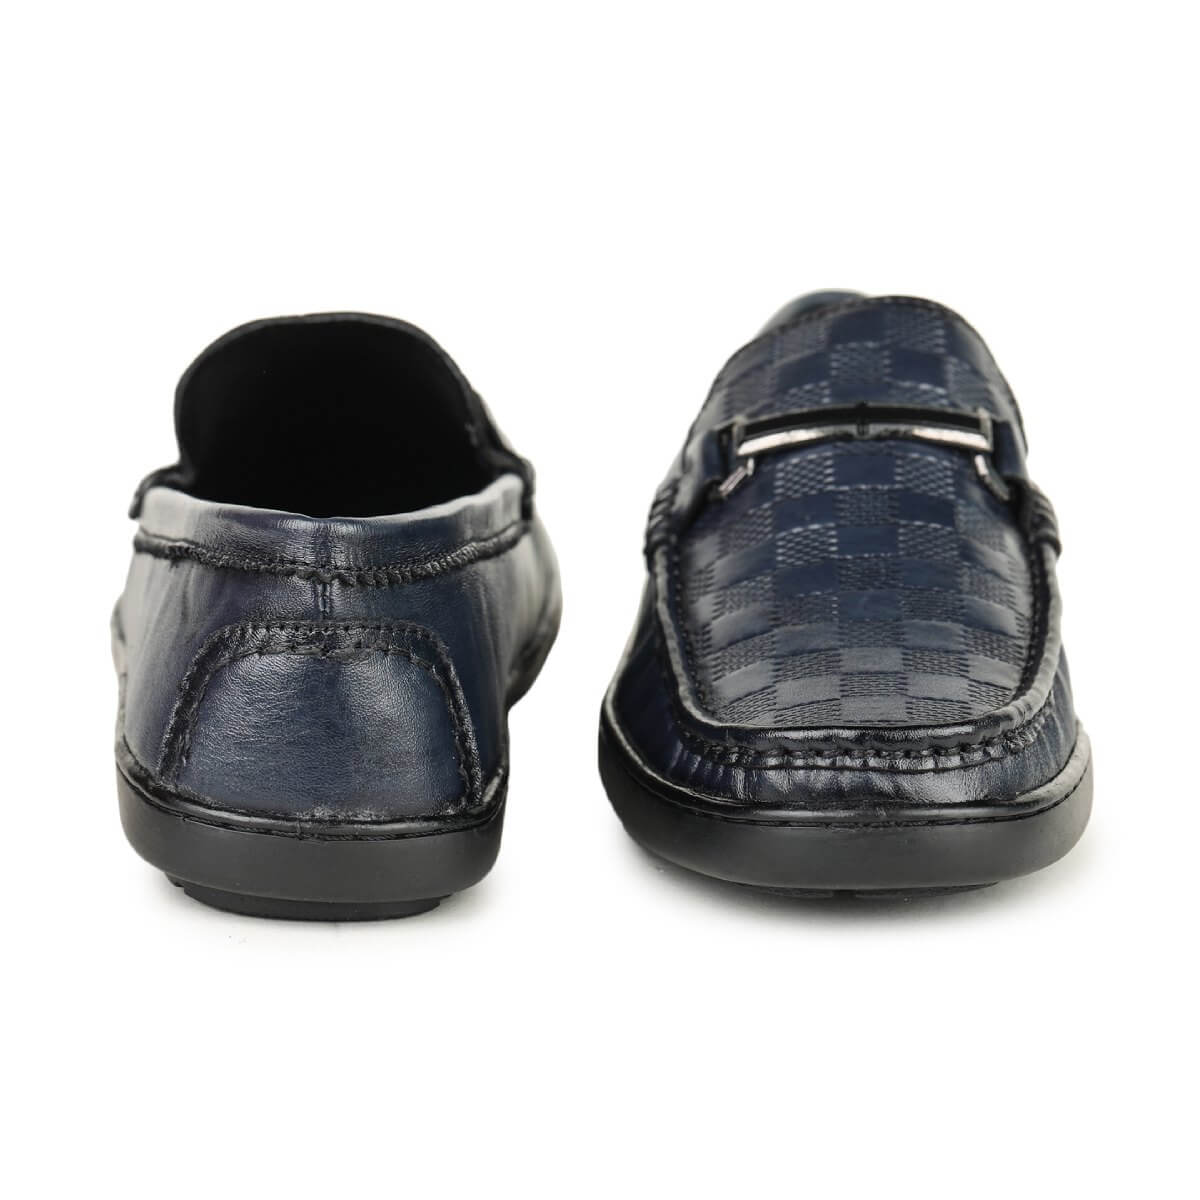 checkbox pattern loafers blue_9